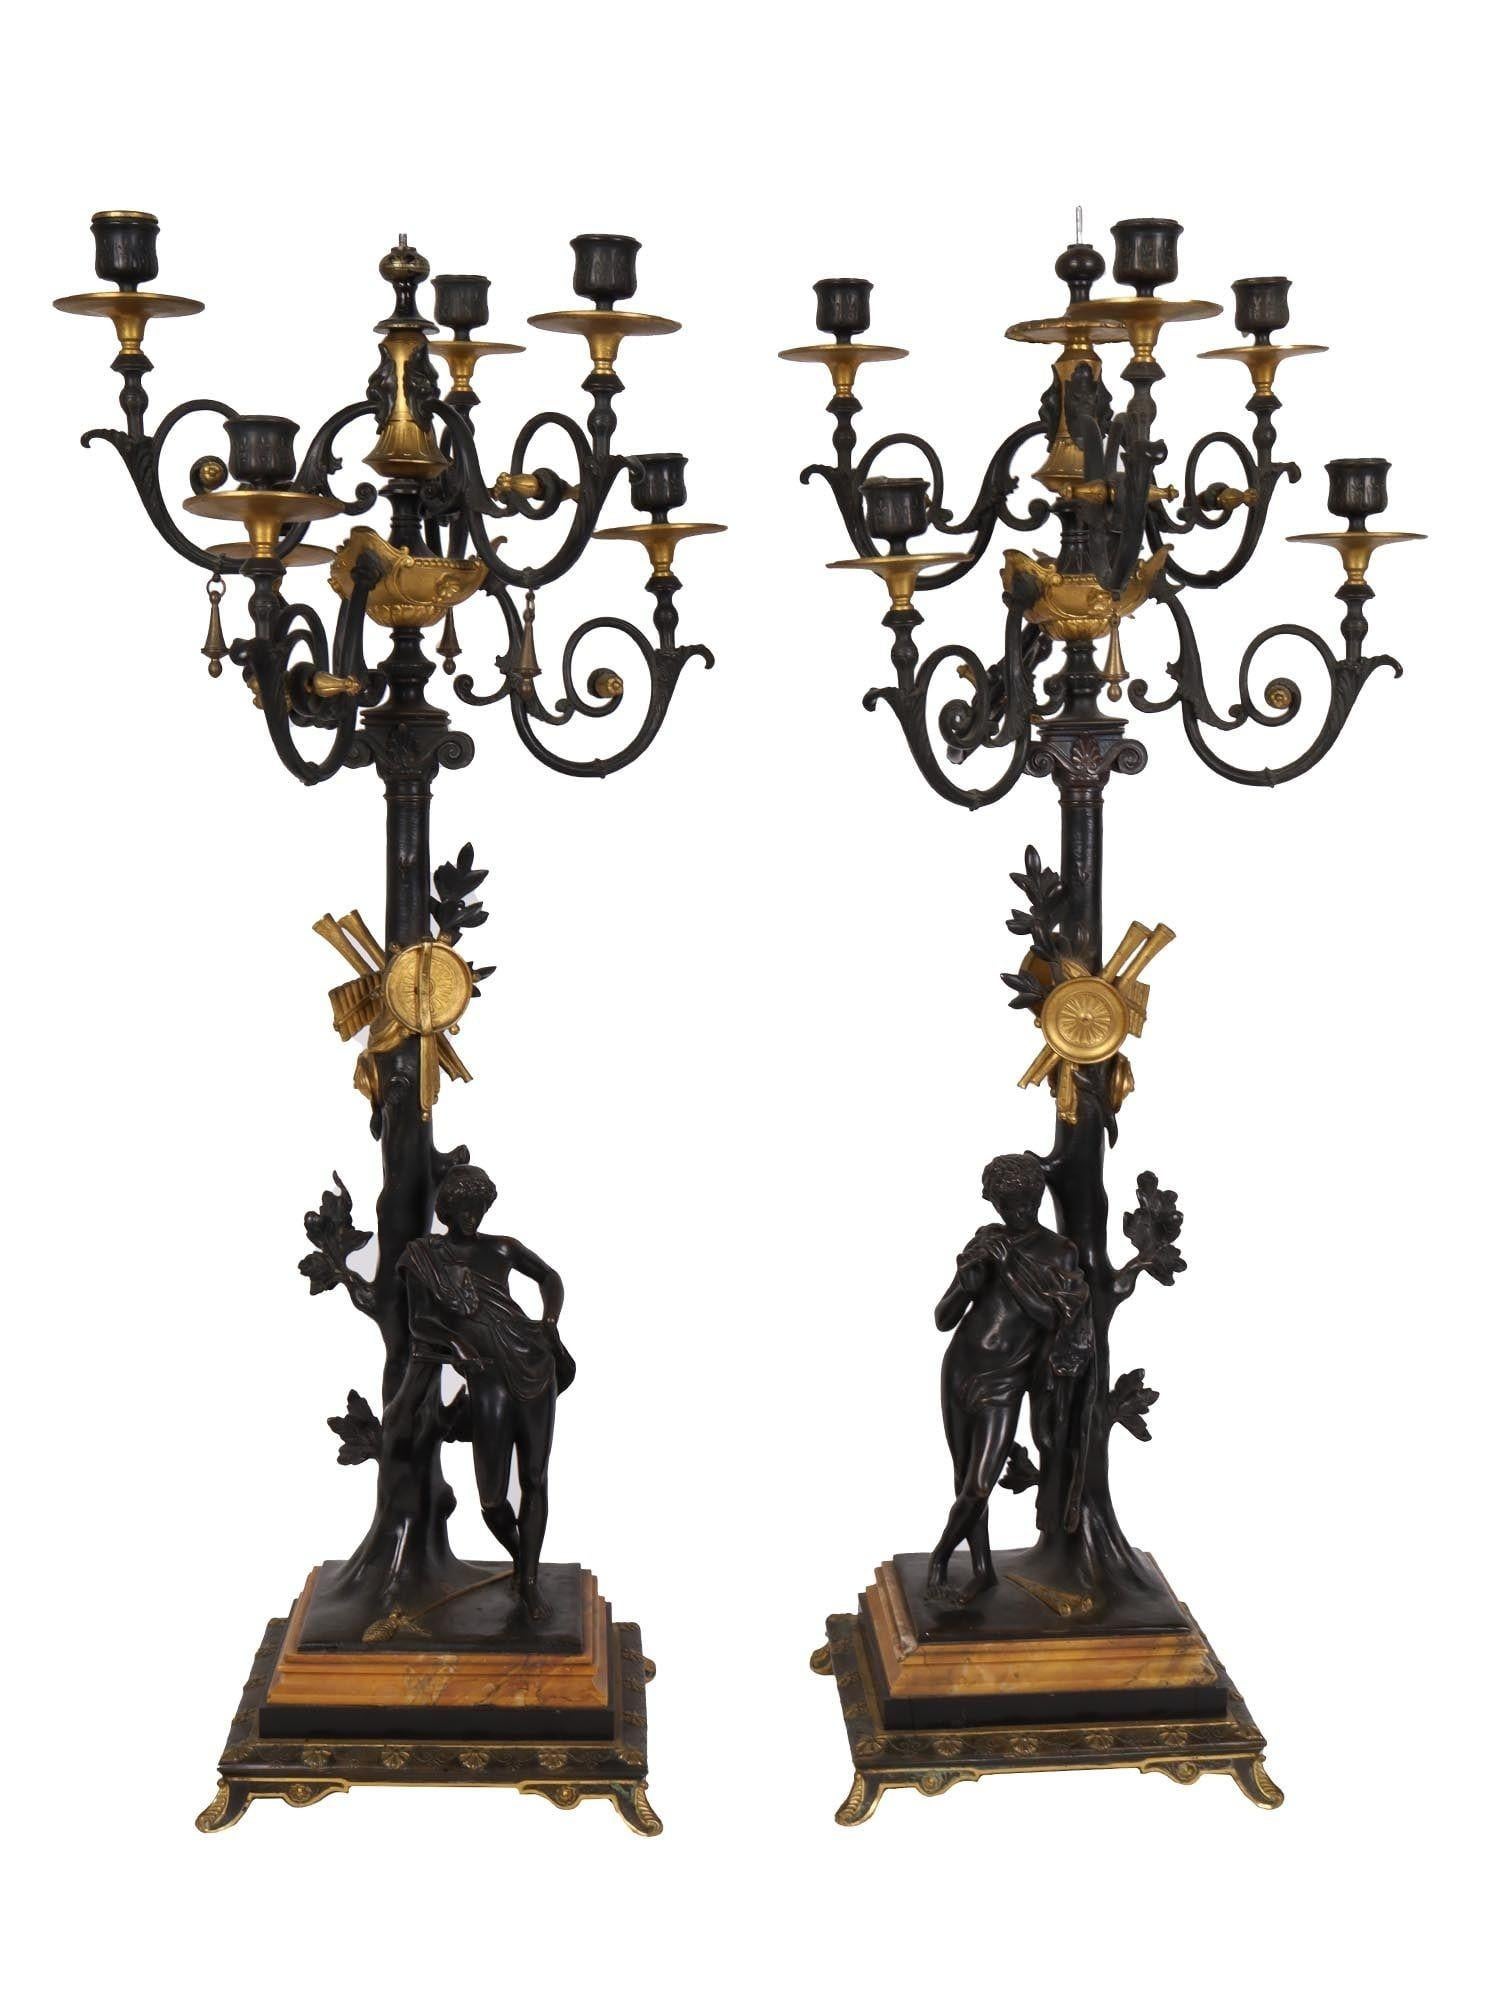 Pair of very fine quality  19 century French Grand Tour two-tone bronze neoclassical figural candelabra on Italian Siena marble bases.